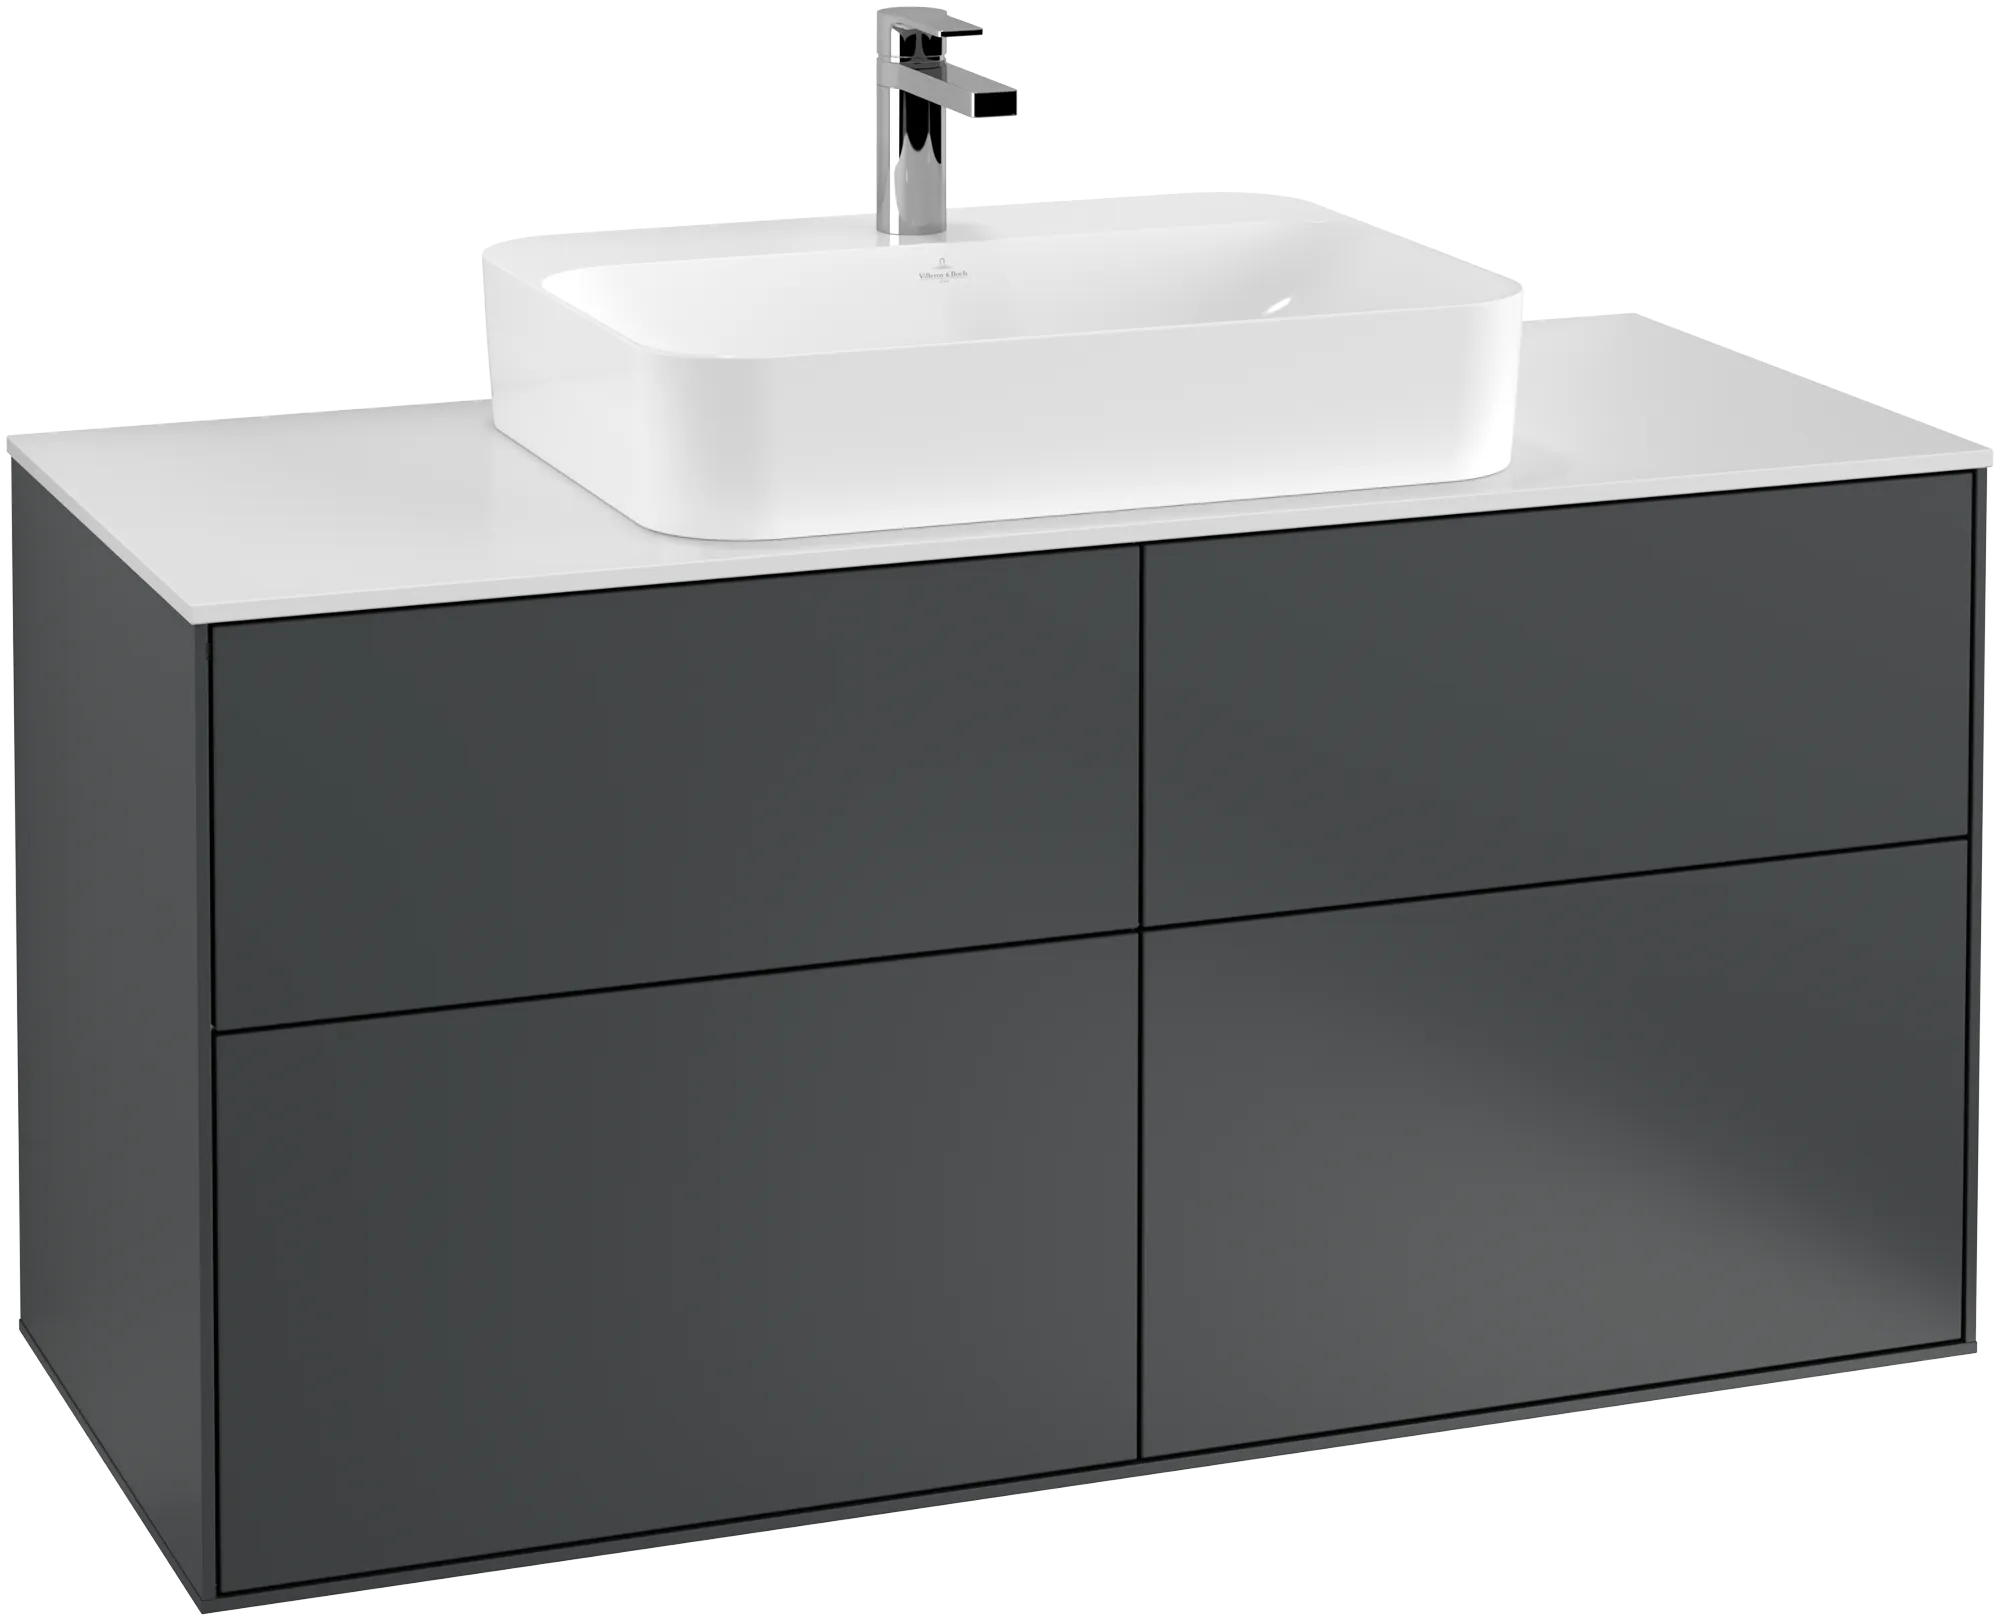 VILLEROY BOCH Finion Vanity unit, with lighting, 4 pull-out compartments, 1200 x 603 x 501 mm, Midnight Blue Matt Lacquer / Glass White Matt #G38100HG resmi